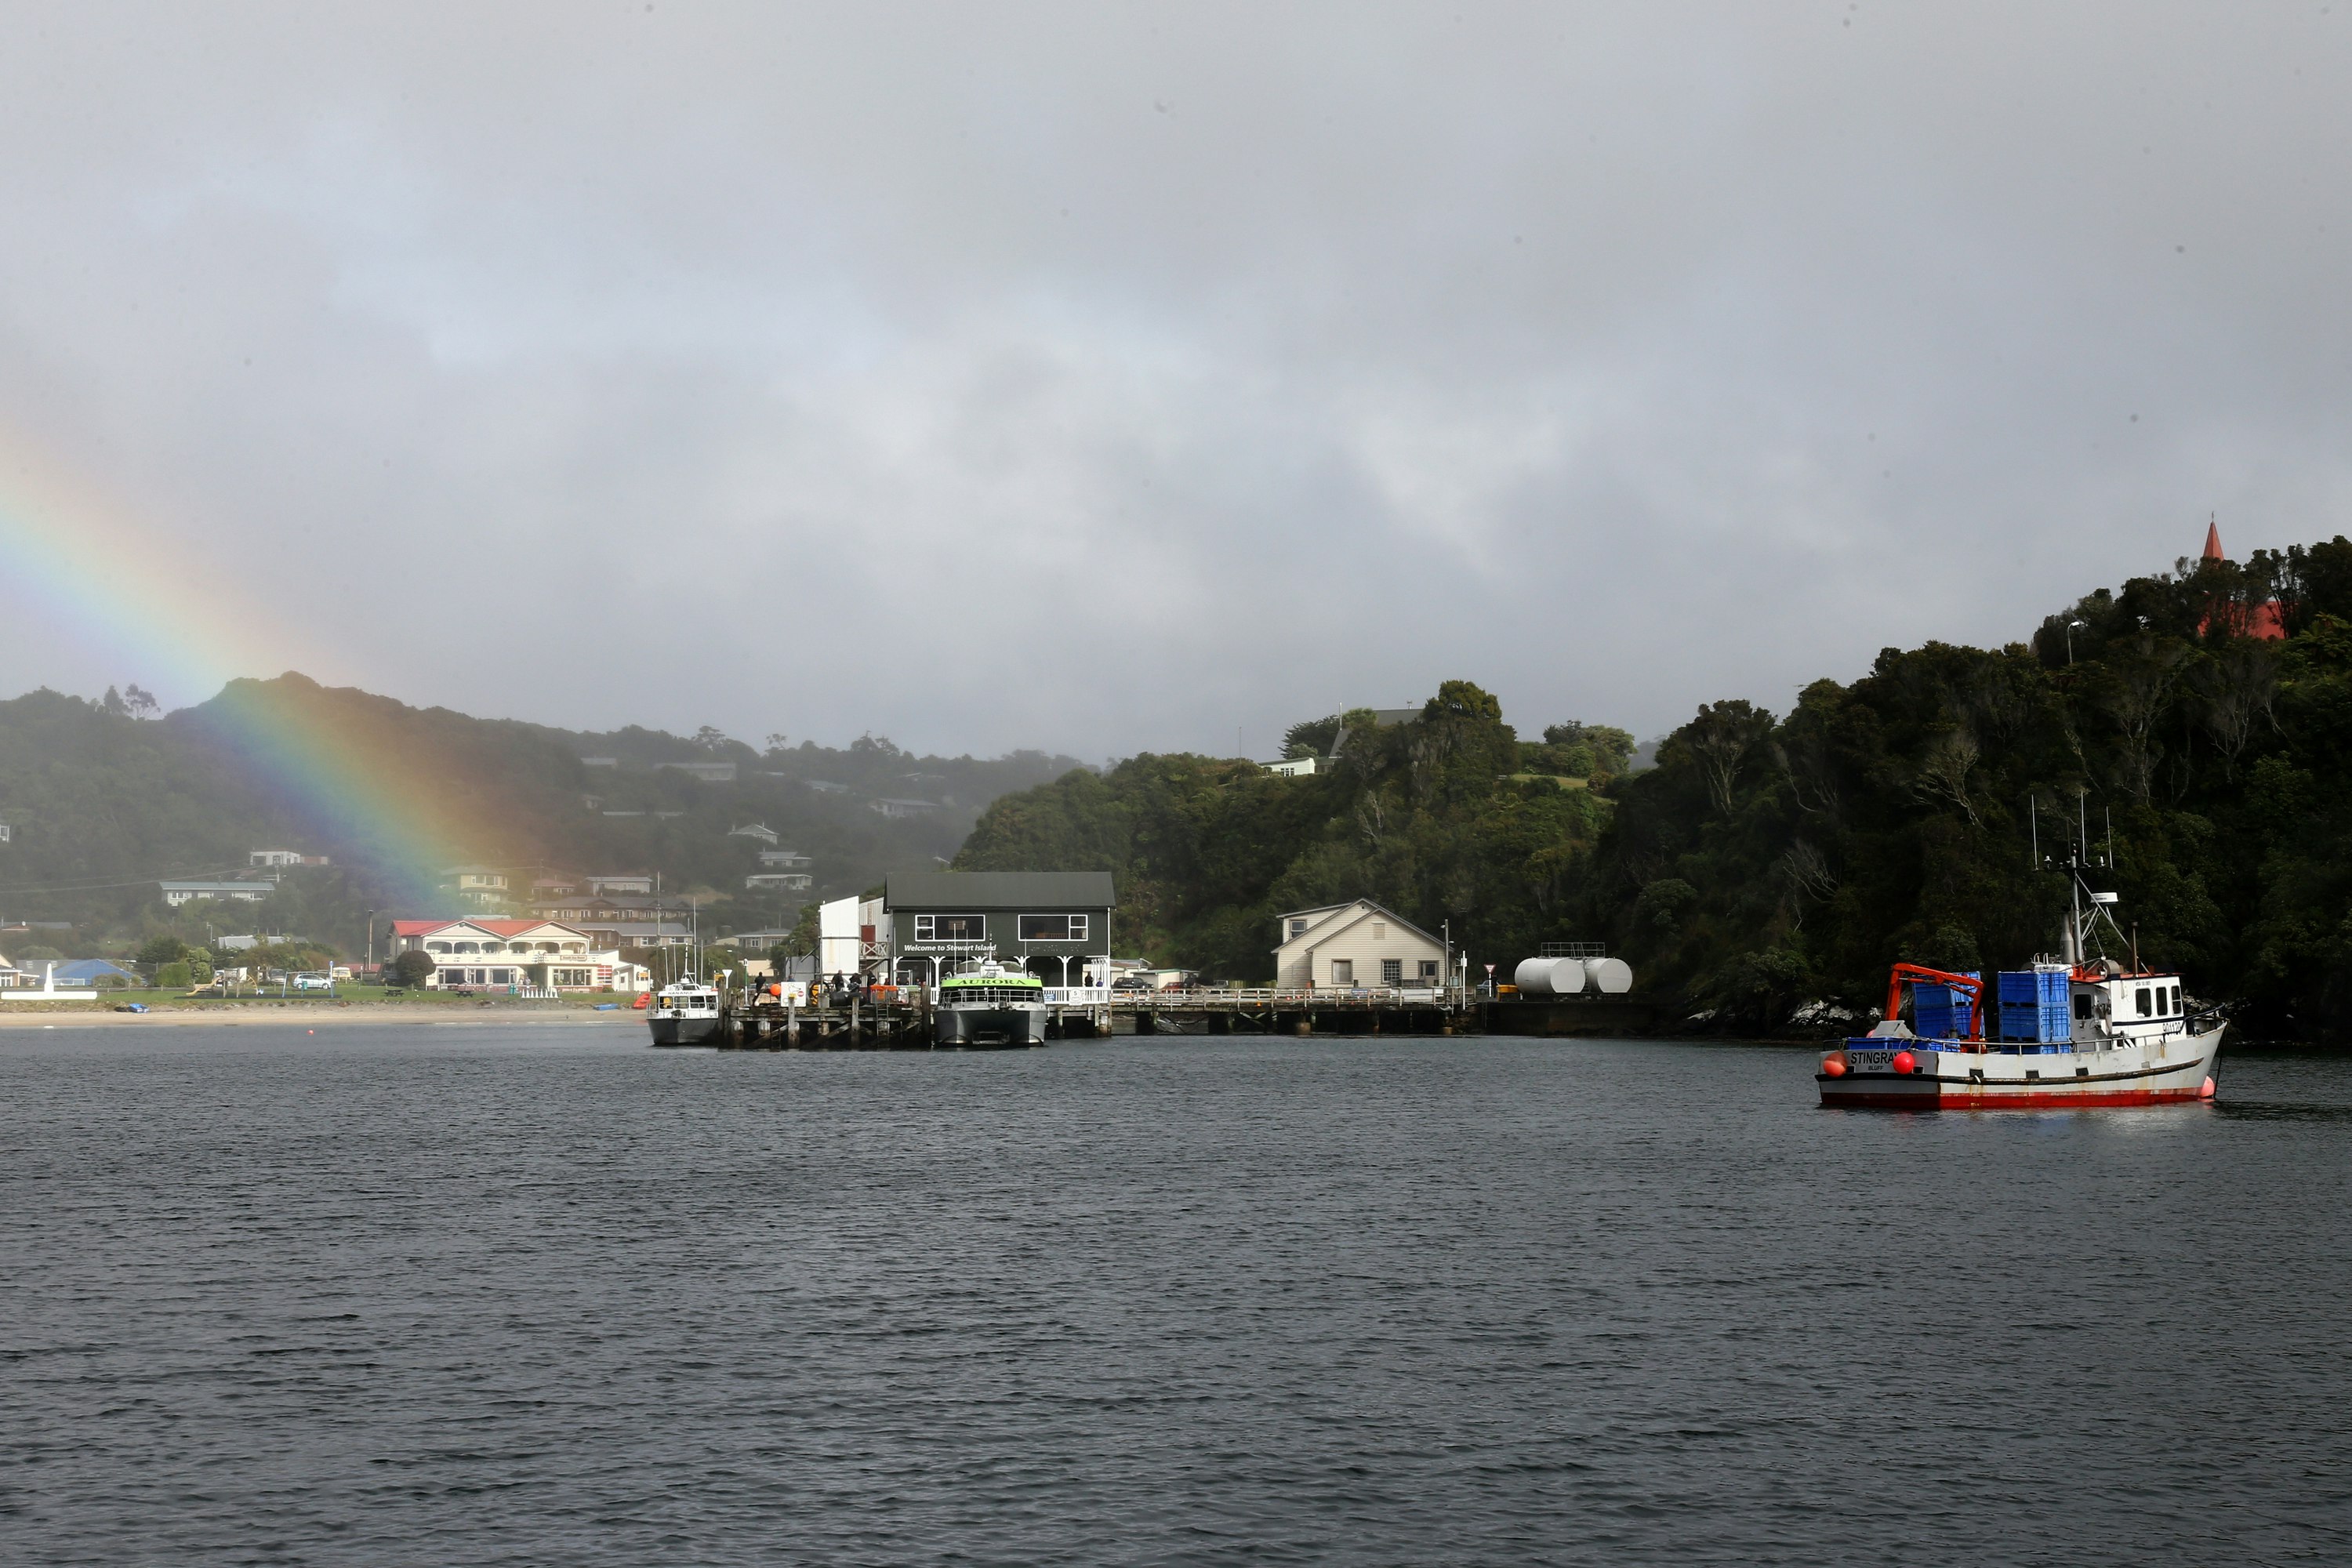 A white and red fishing boat pulls into the harbor near Oban, New Zealand on the right side of the frame as a rainbow illuminates the white buildings and dock on the right side of the frame. The ocean is a deep slate blue and the sky is a light grey. The green forested hillsides along the shore are dotted with small white structures and red peaked roofs